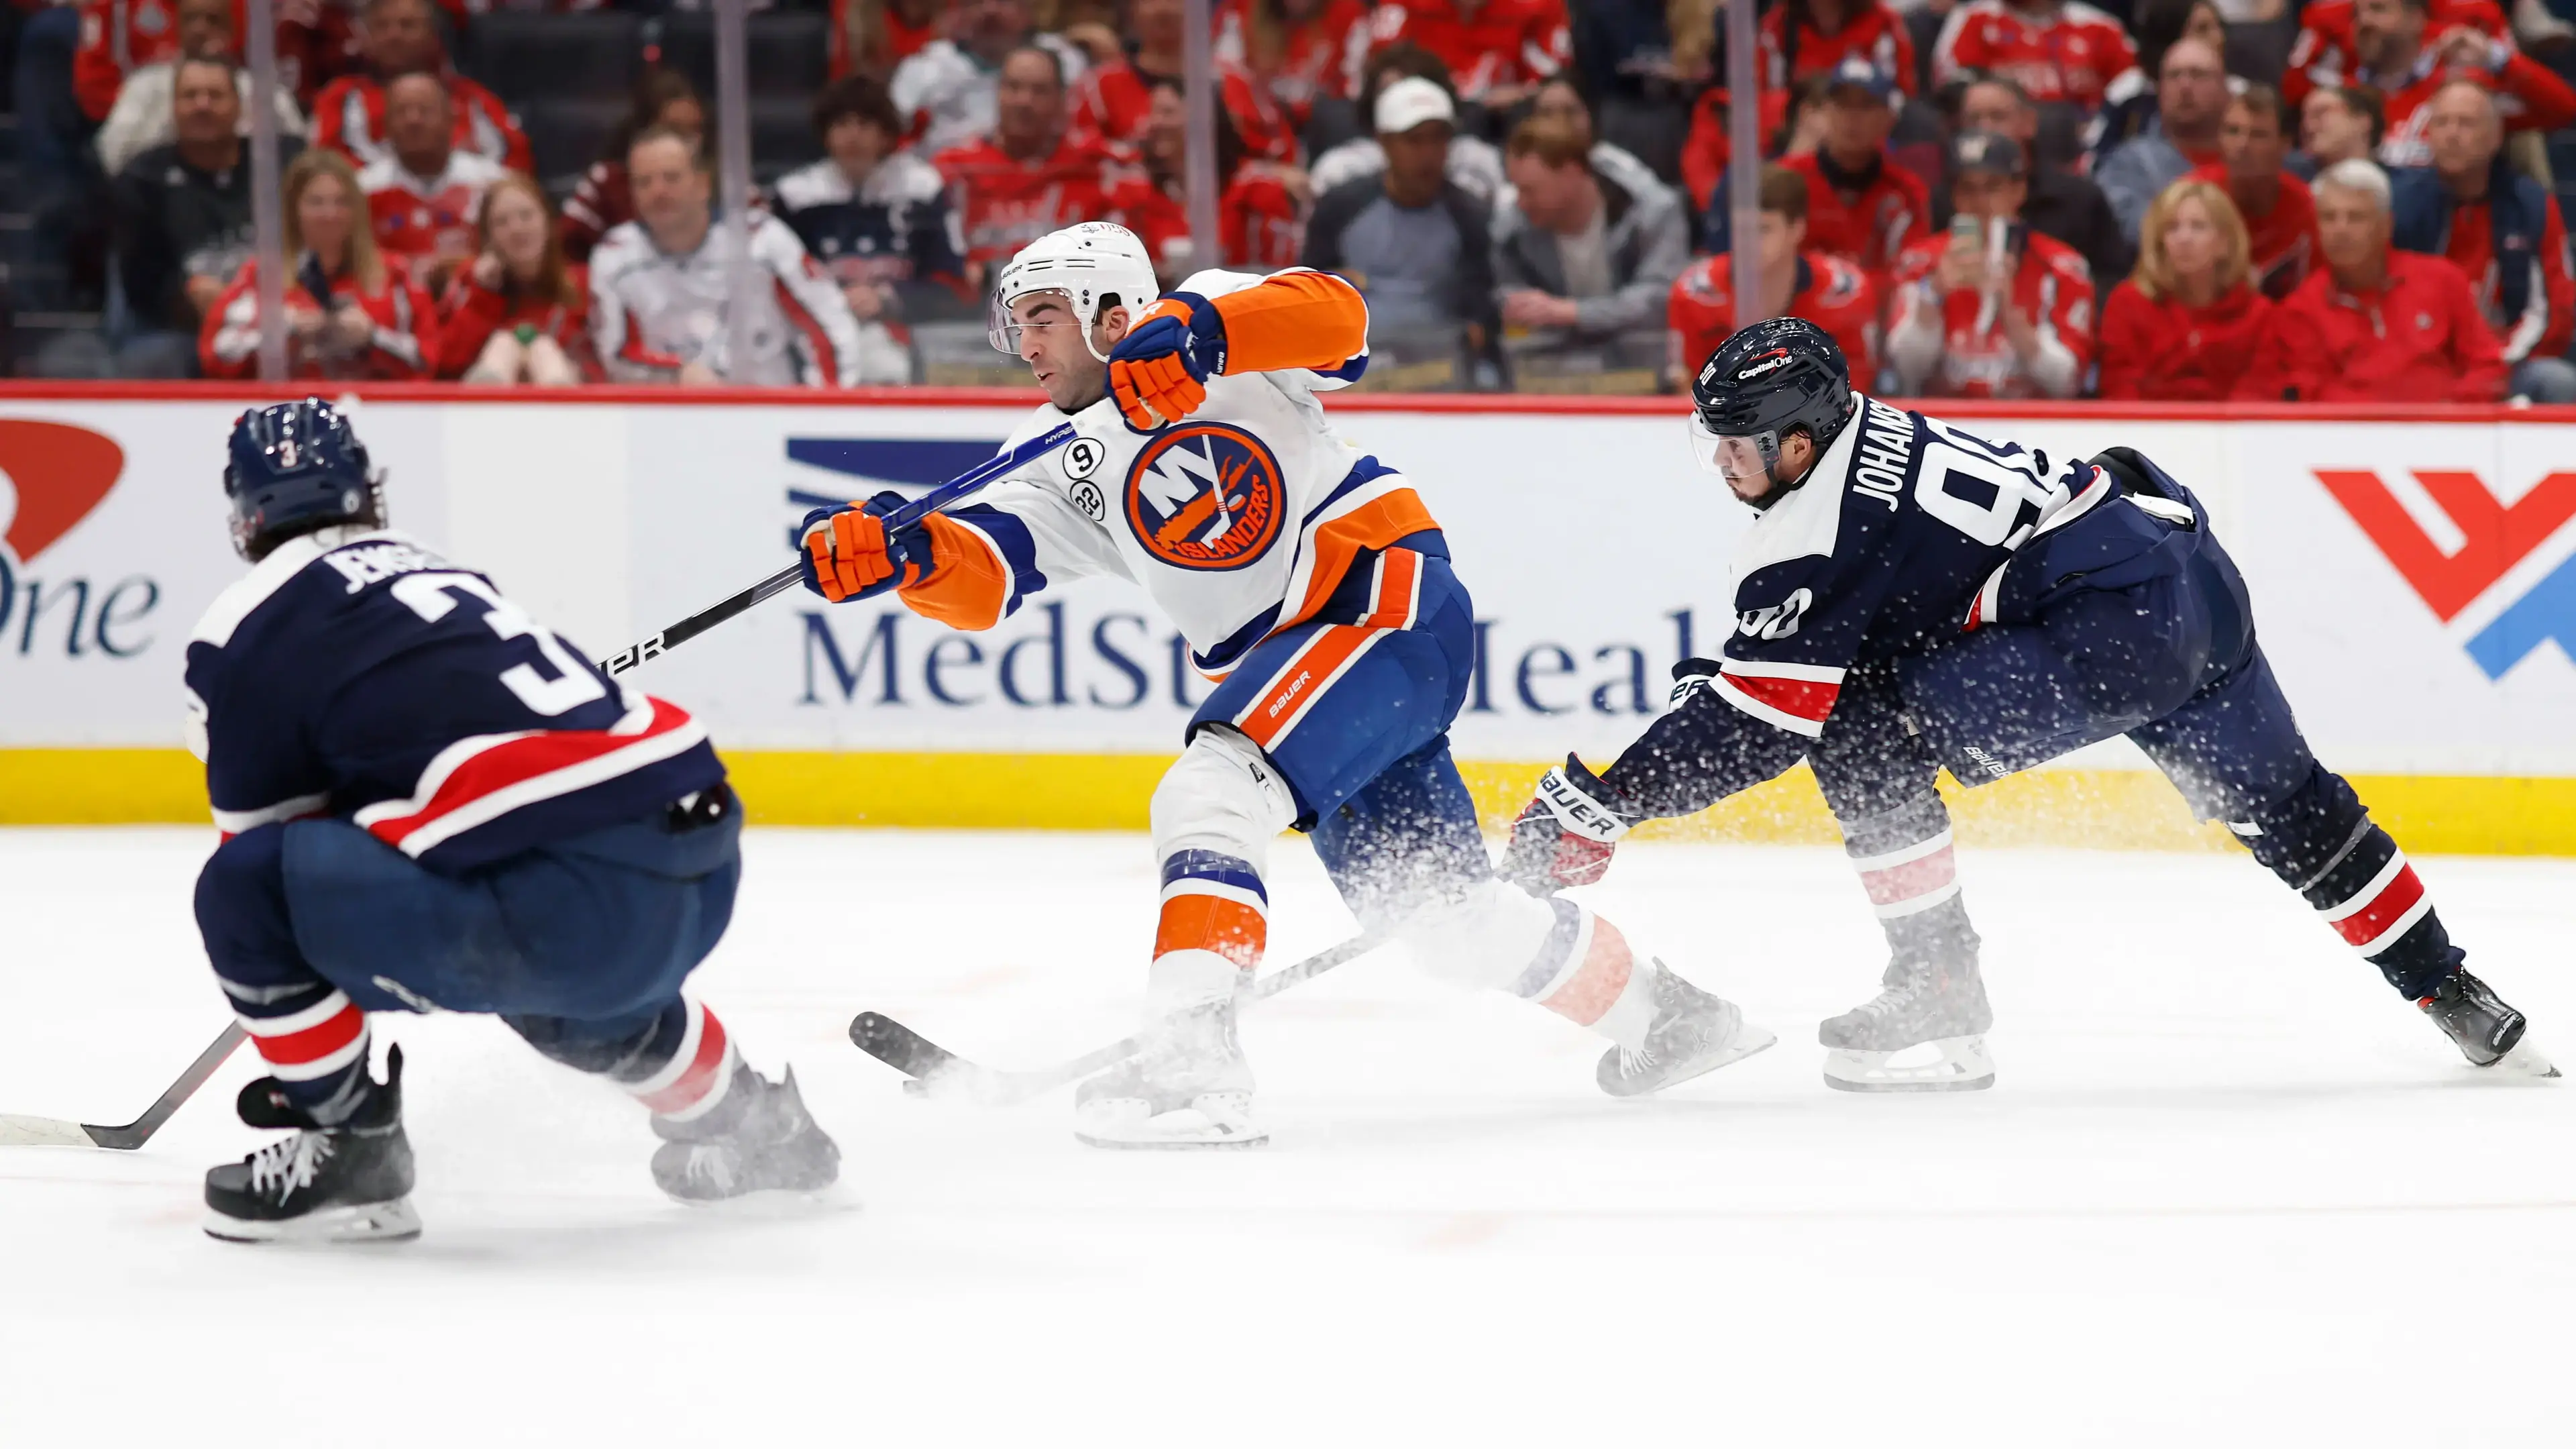 Apr 26, 2022; Washington, District of Columbia, USA; New York Islanders right wing Kyle Palmieri (21) shoots the puck as Washington Capitals defenseman Nick Jensen (3) and Capitals left wing Marcus Johansson (90) defend in the second period at Capital One Arena. / Geoff Burke-USA TODAY Sports